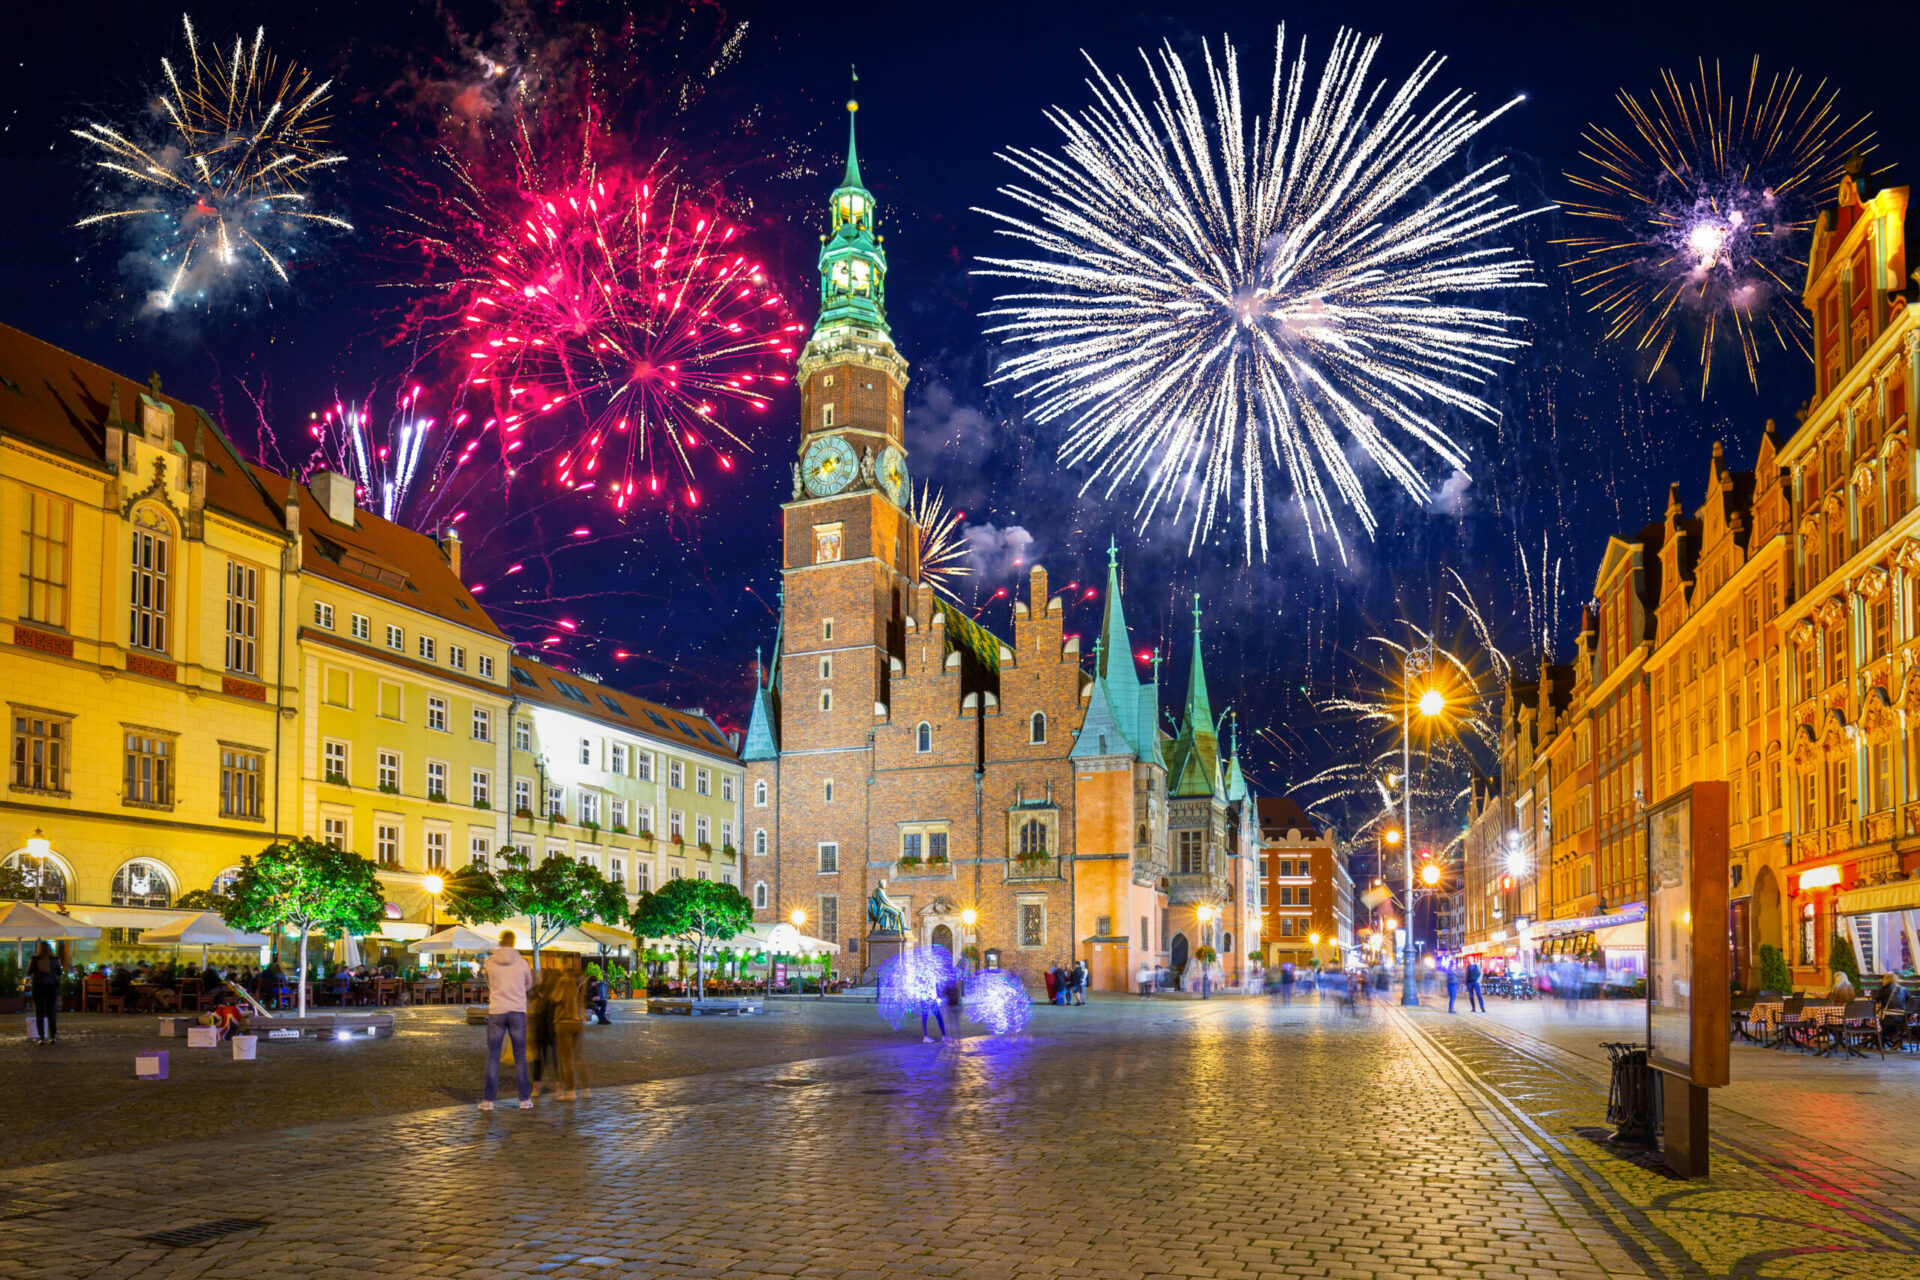 New Years firework display over the Wrocaw old town. Poland